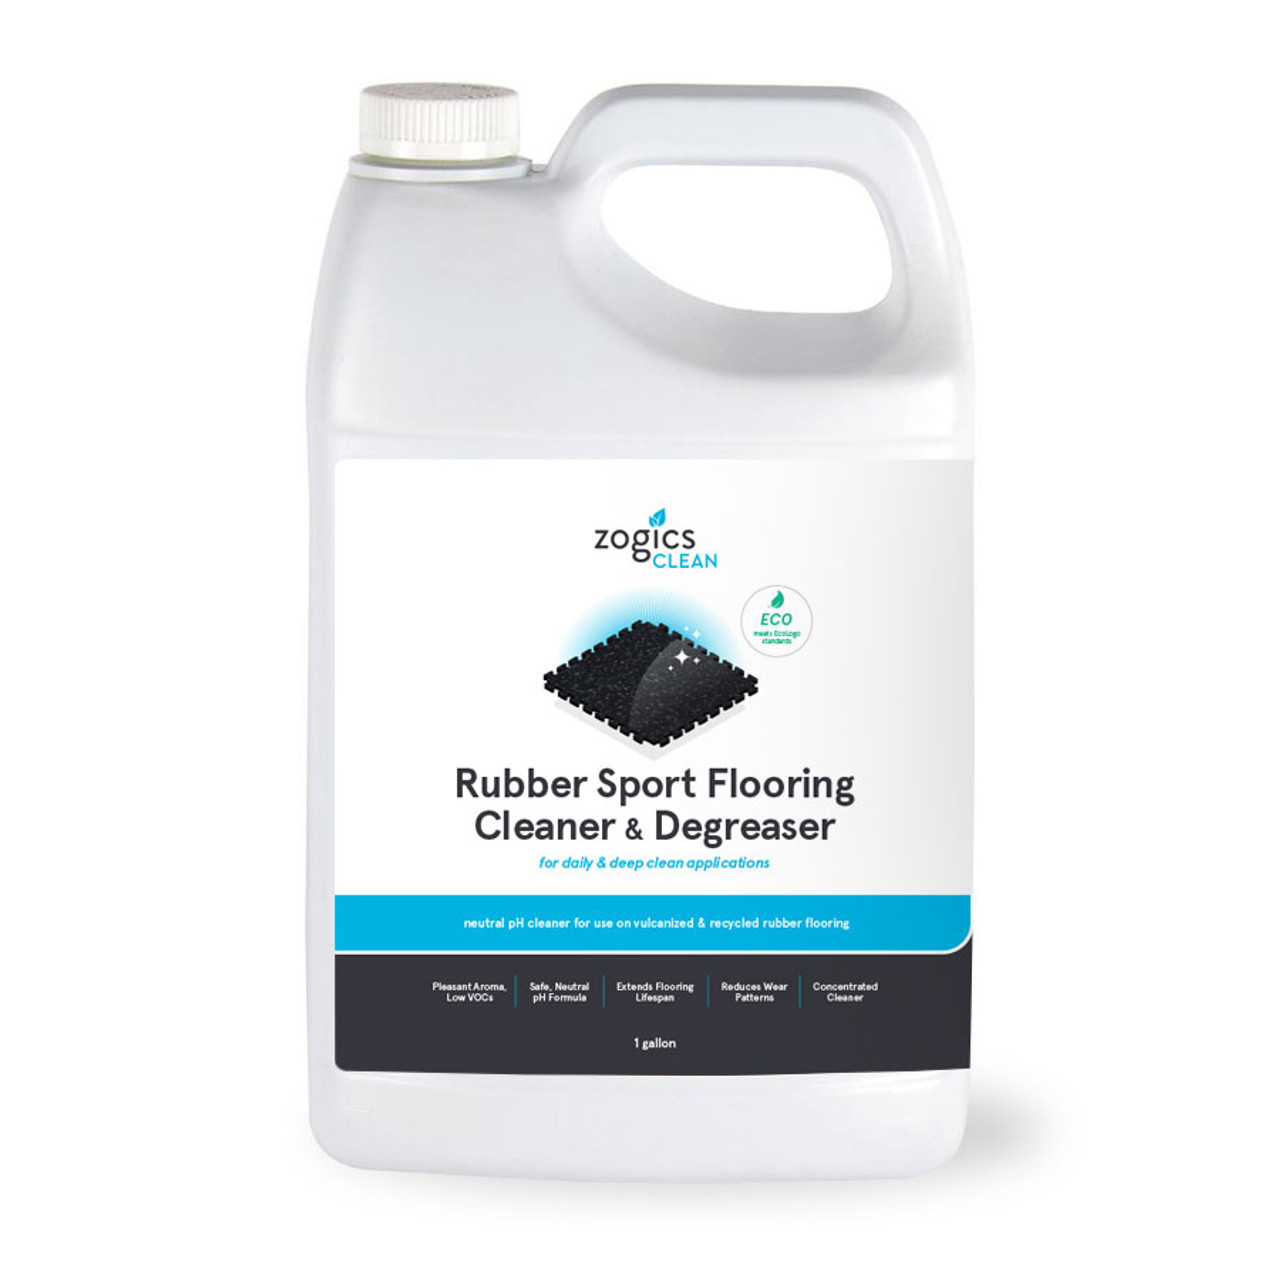 Rubber Parts Cleaner 1 gallon